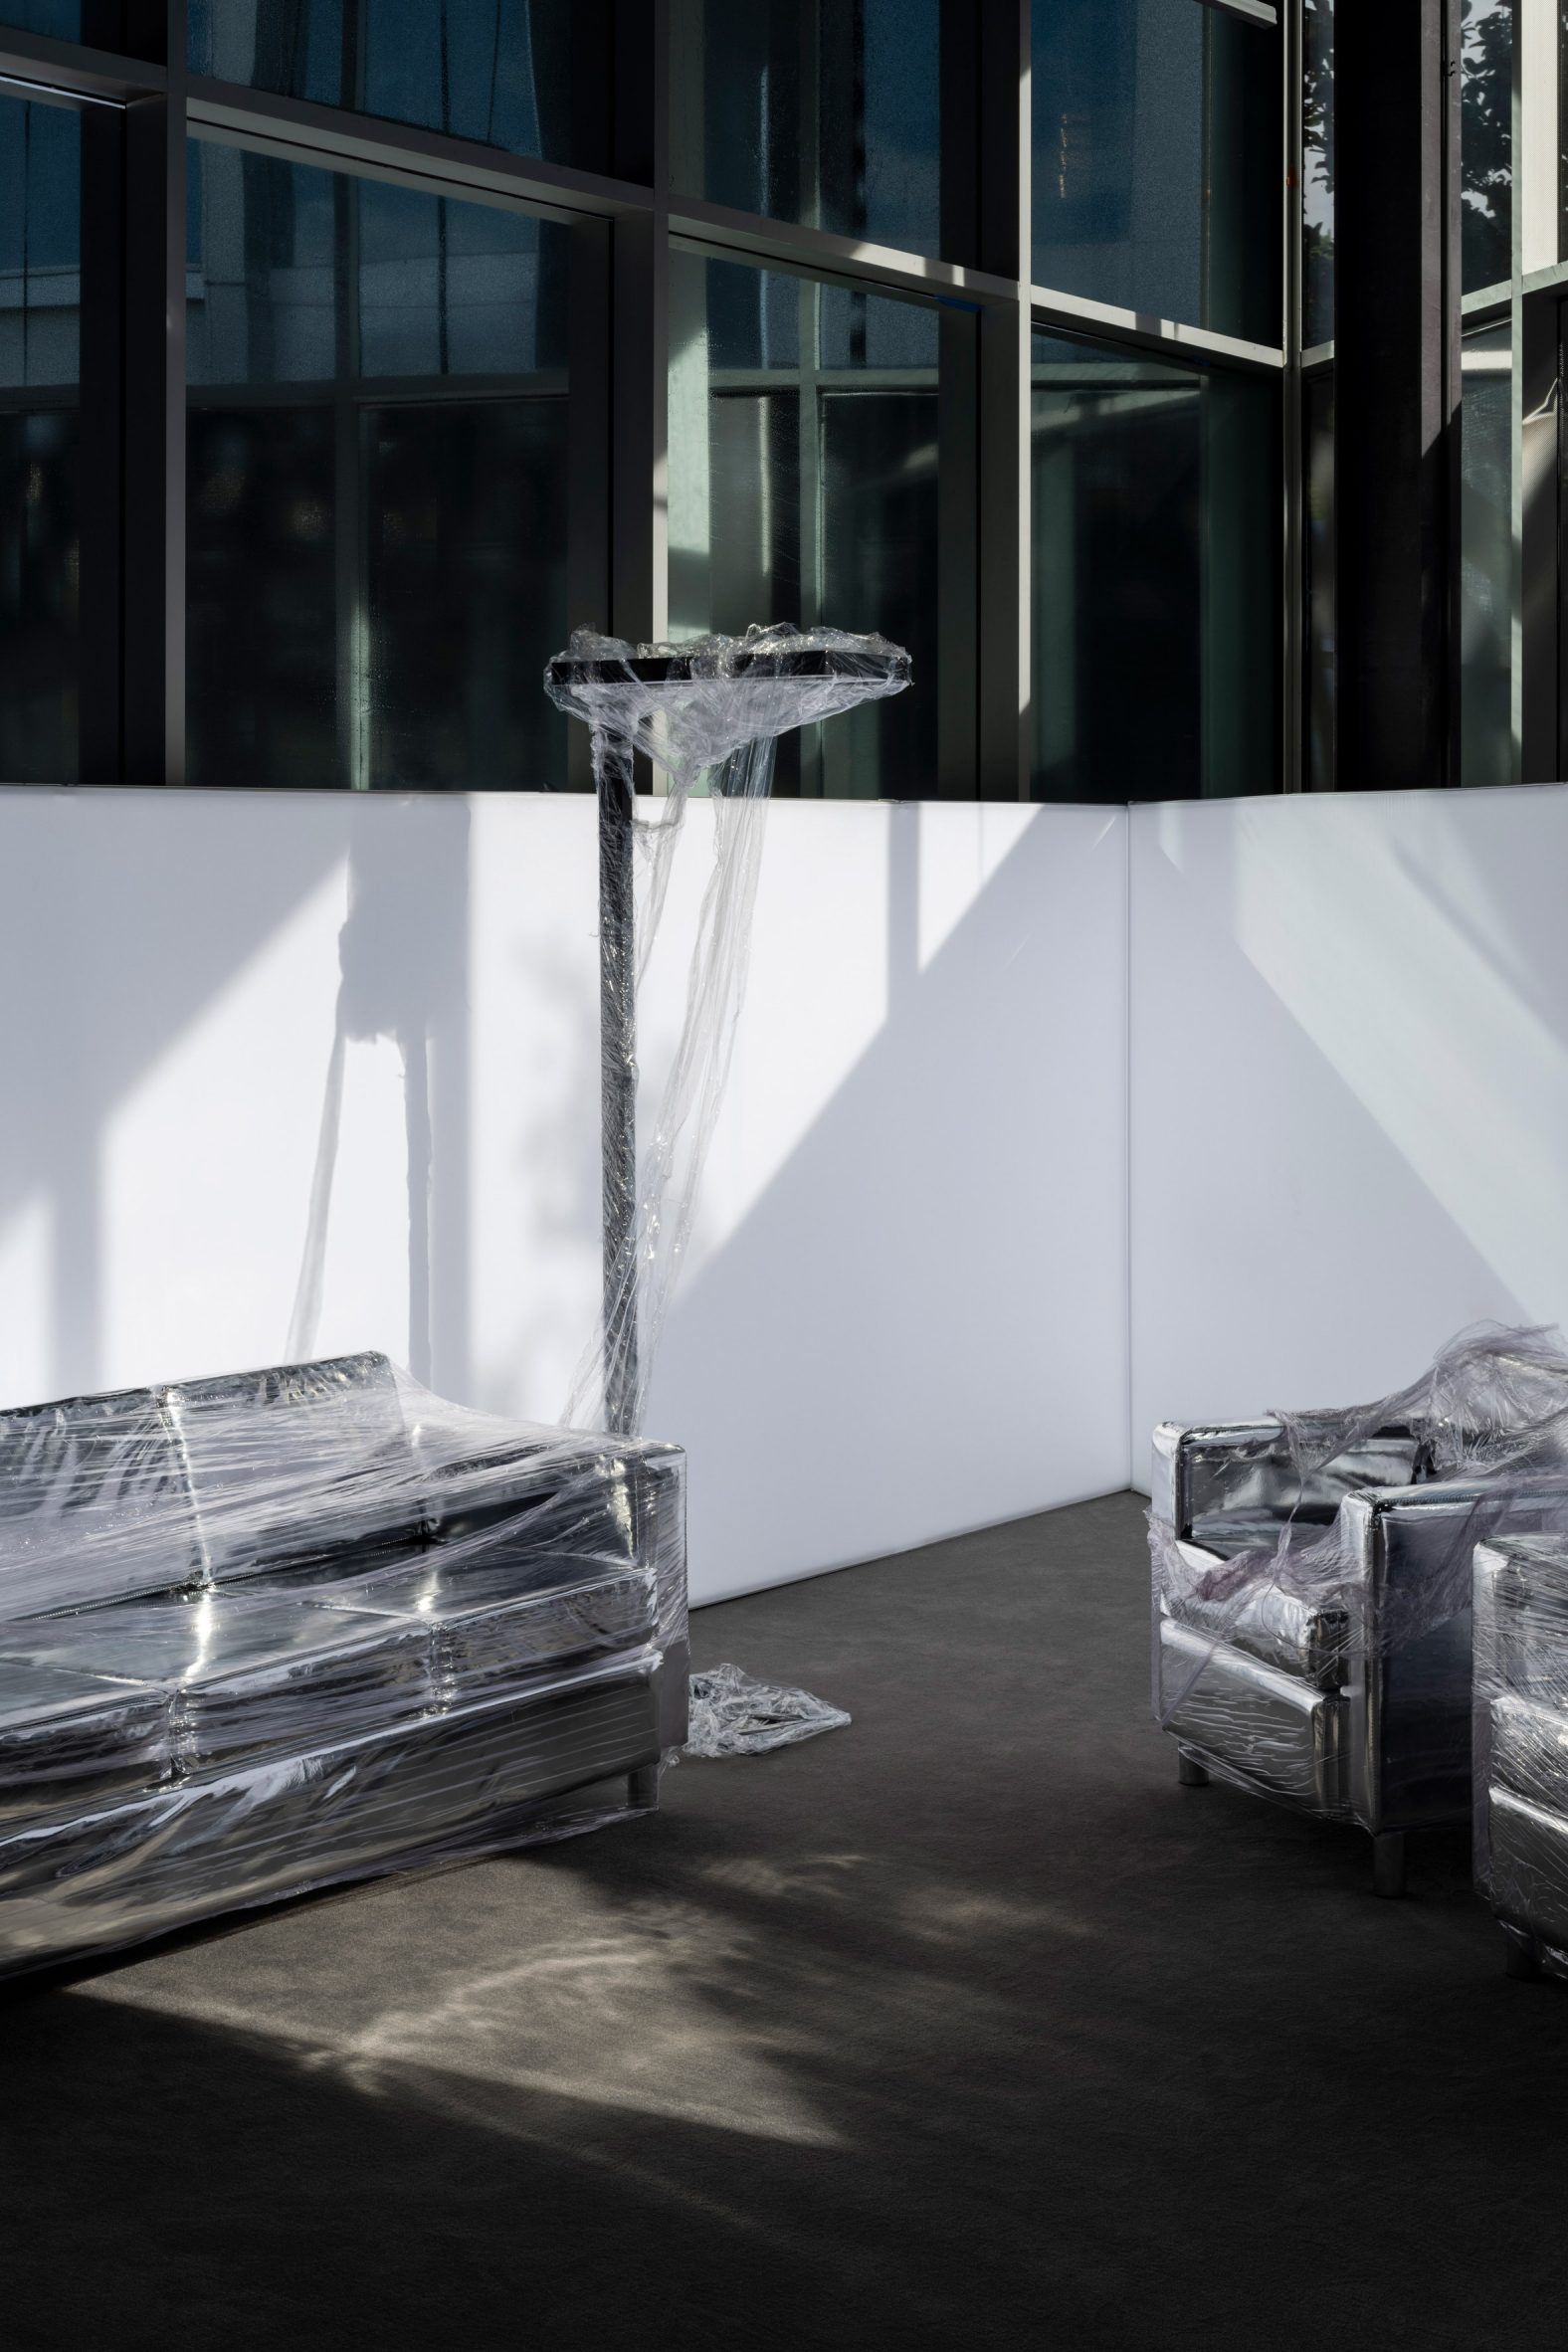 Plastic-wrapped silver furniture